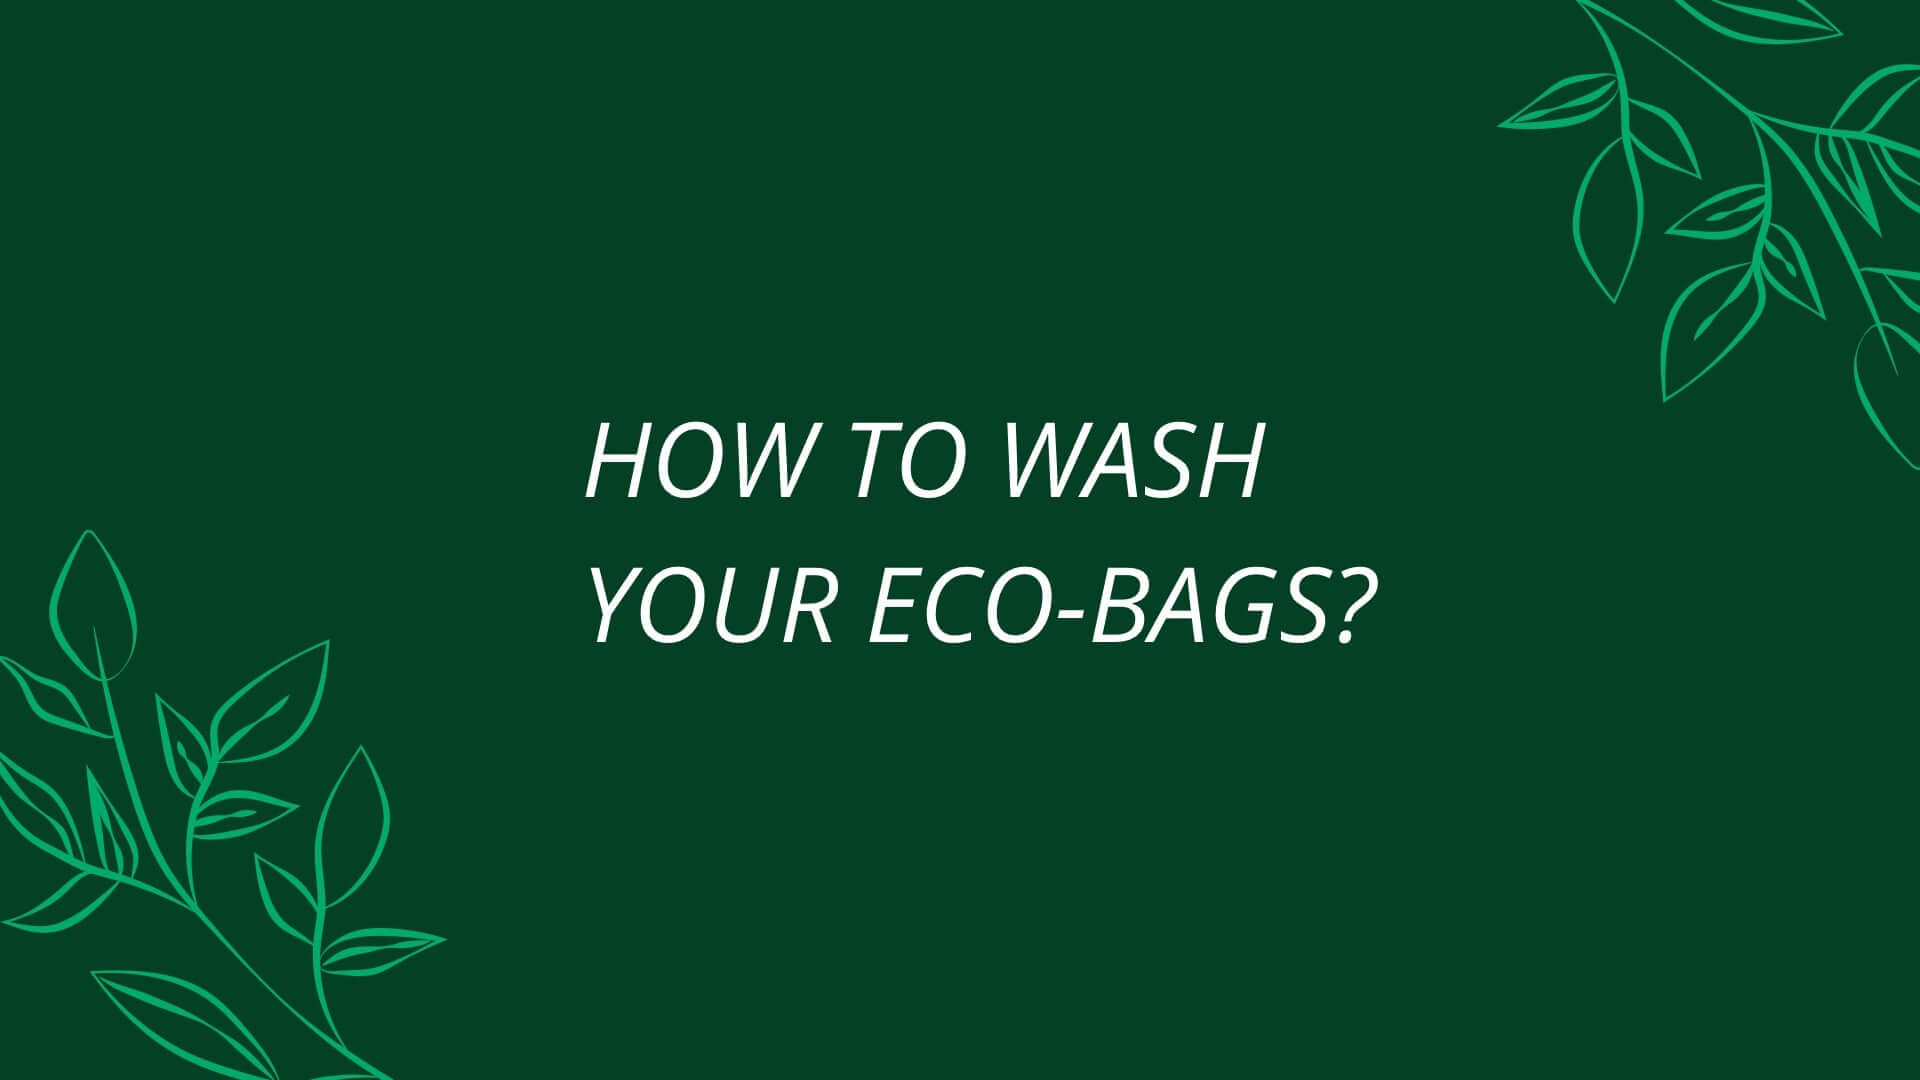 How To Wash and Maintain Eco-Friendly and Reusable Bags